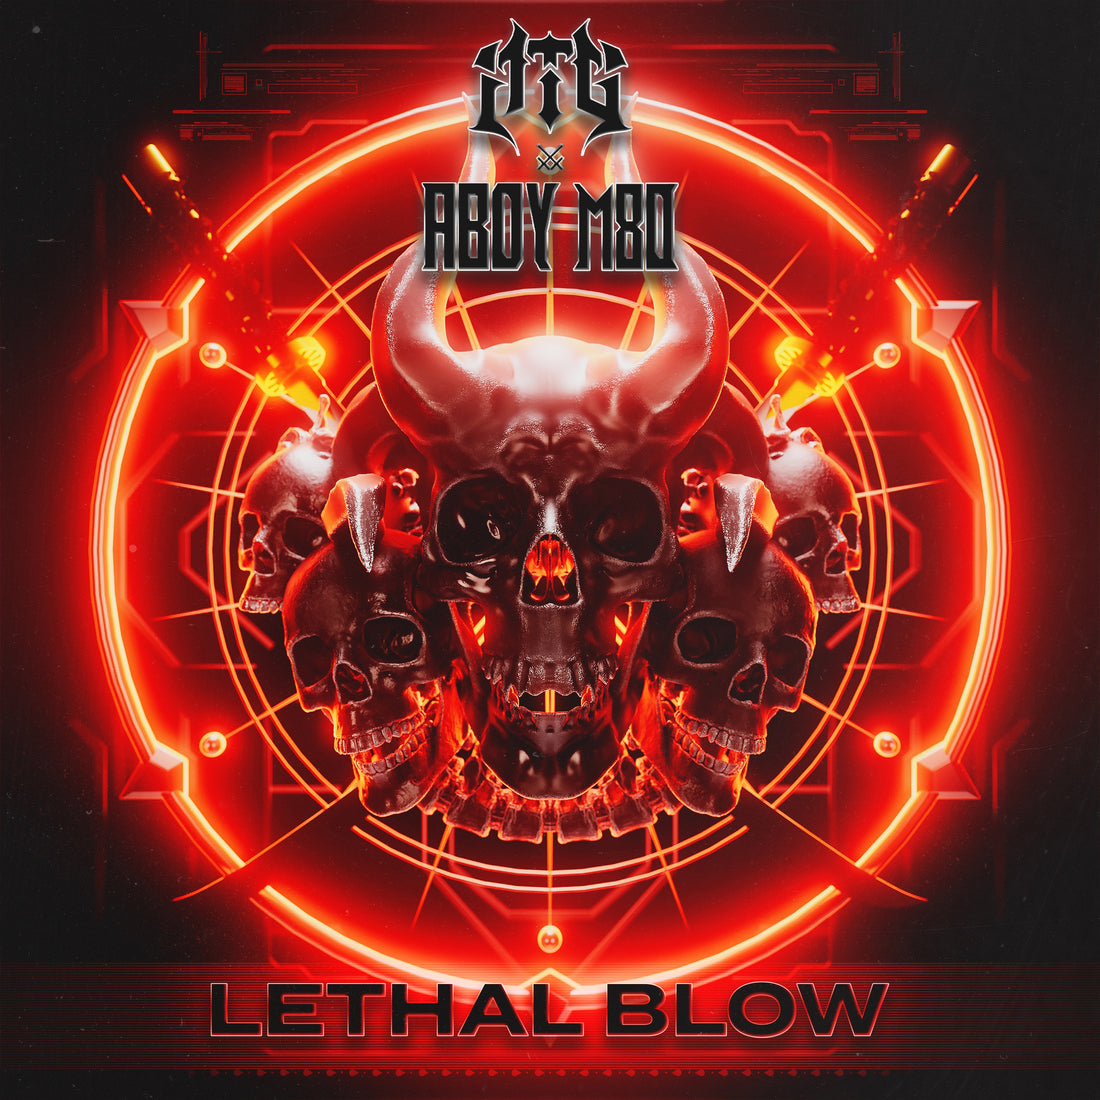 Aboy M80 and ATG combine forces to create a powerful track titled 'Lethal Blow'